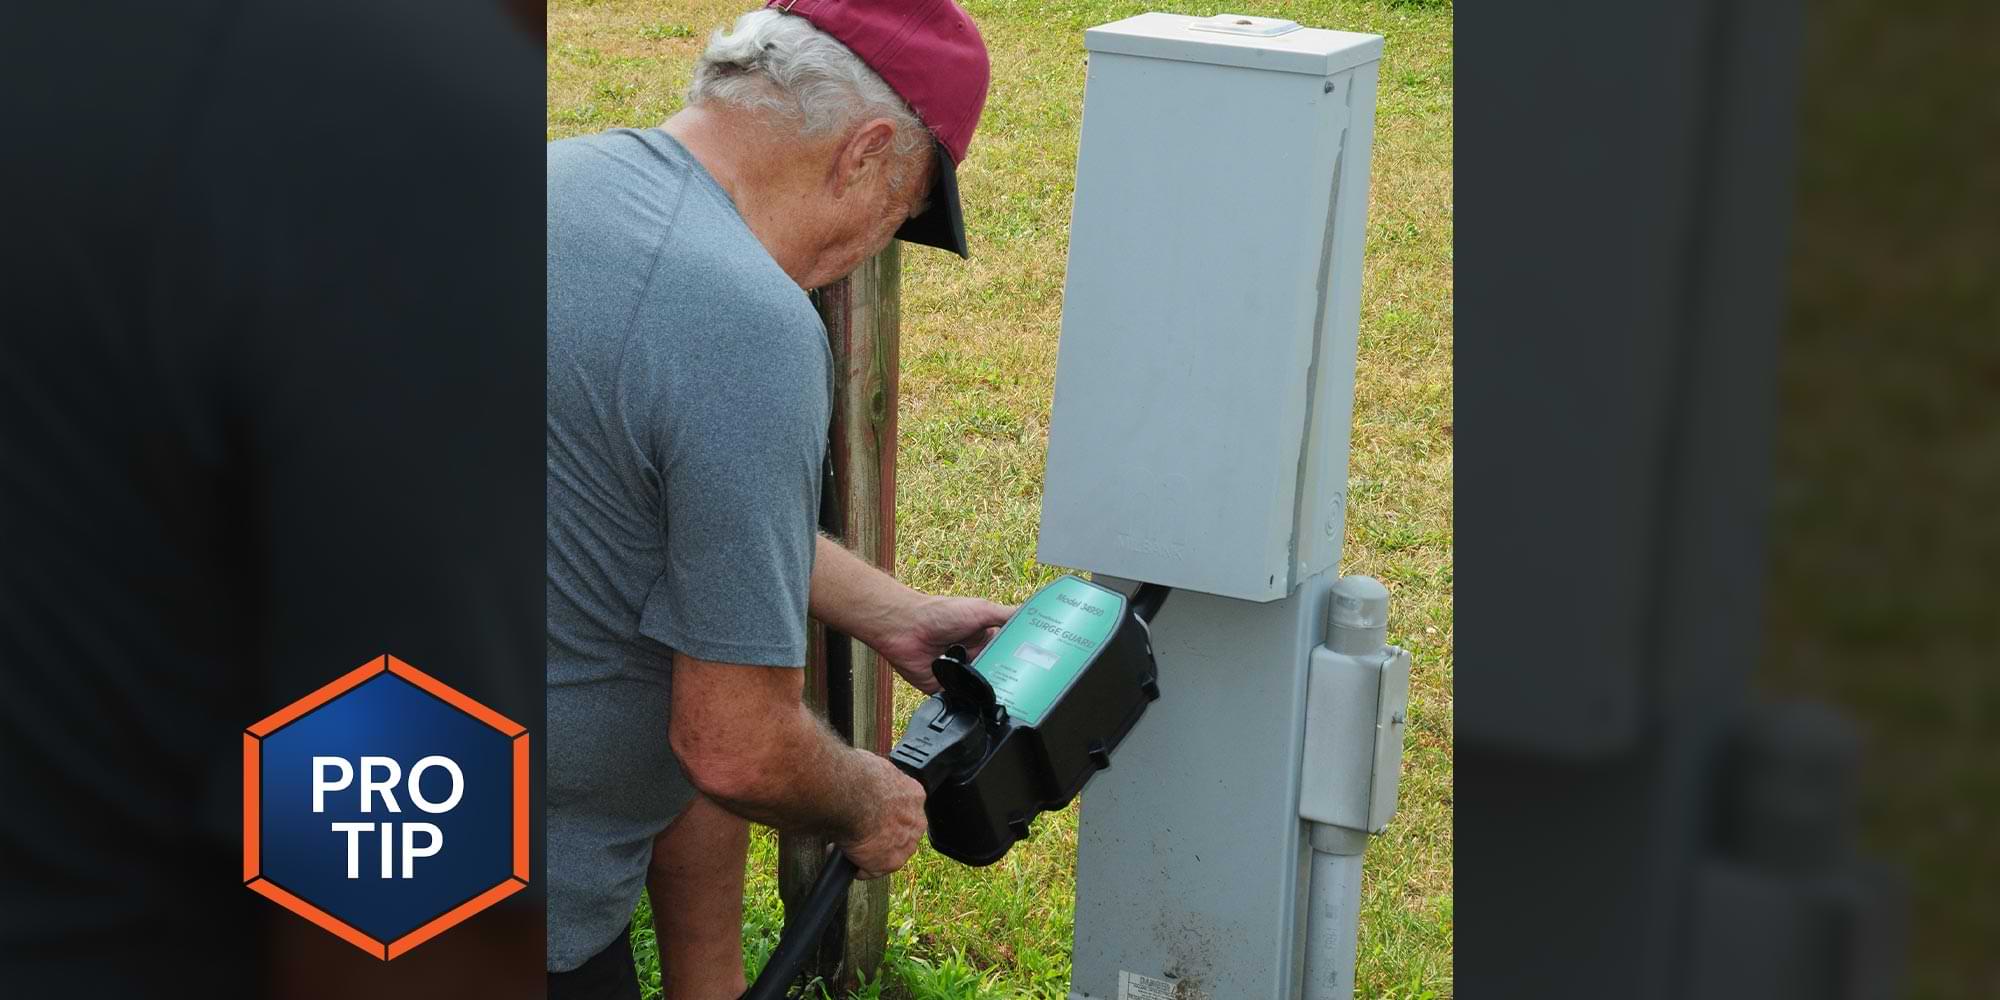 a man uses a surge guard on an outdoor electrical outlet